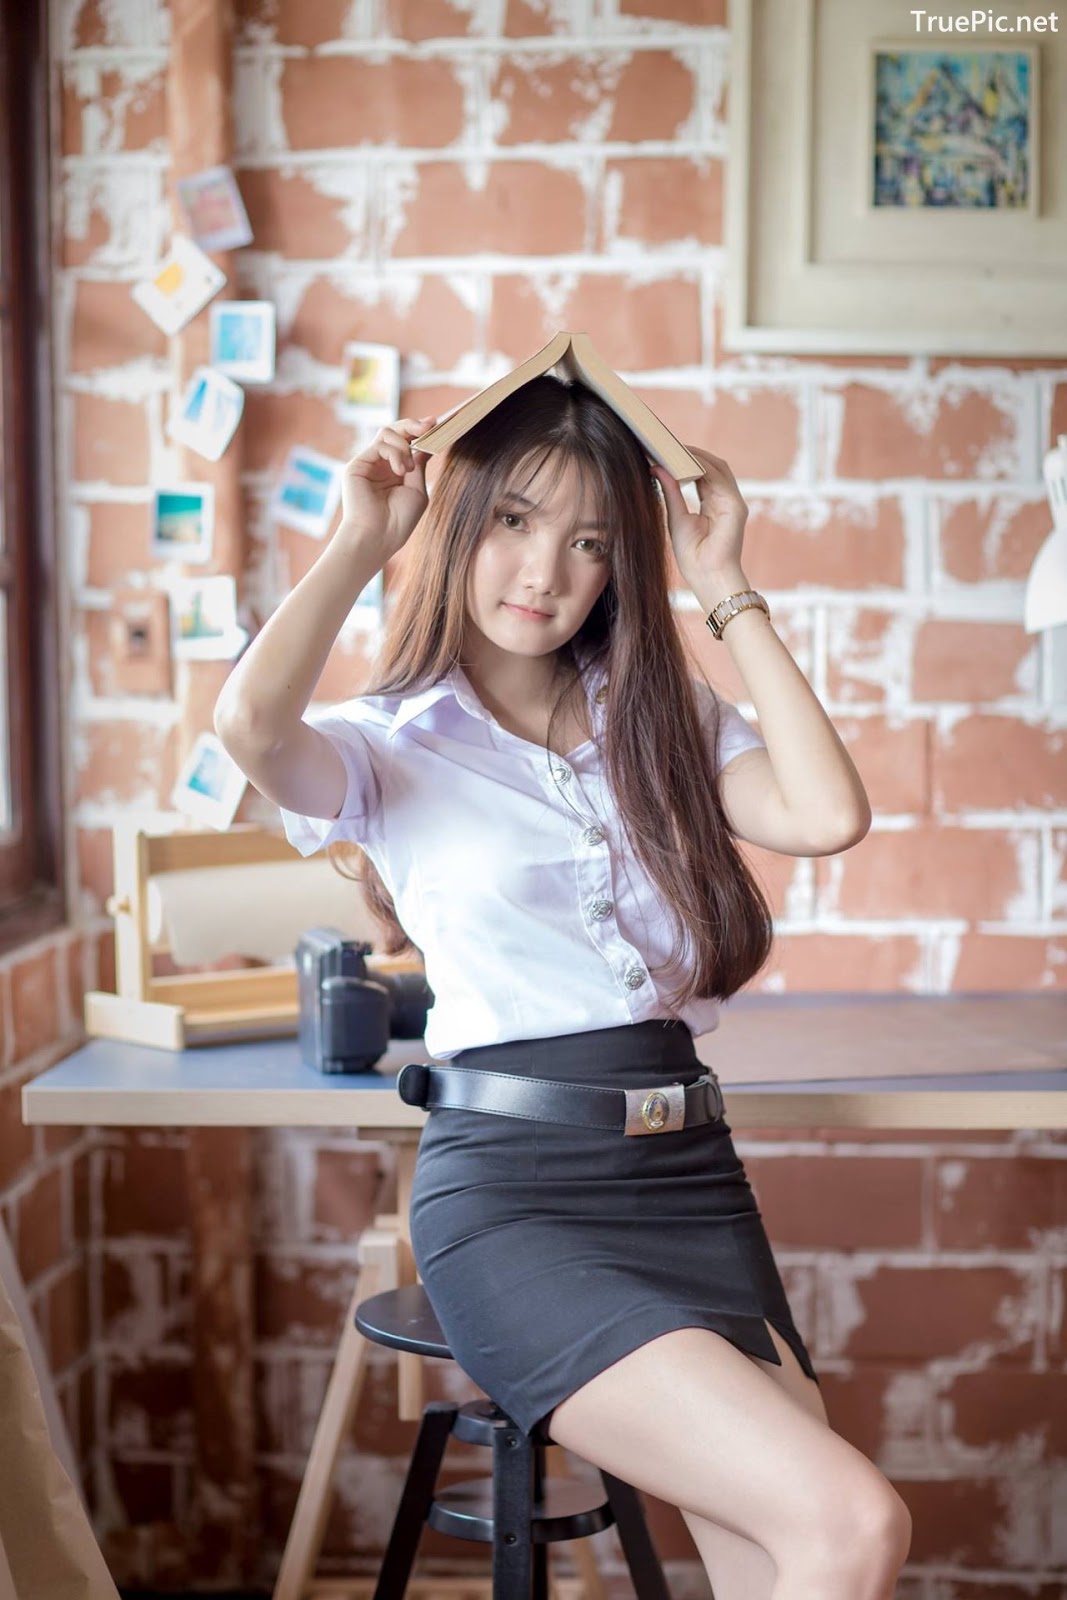 Image-Thailand-Cute-Model-Creammy-Chanama-Concept-Innocent-Student-Girl-TruePic.net- Picture-7